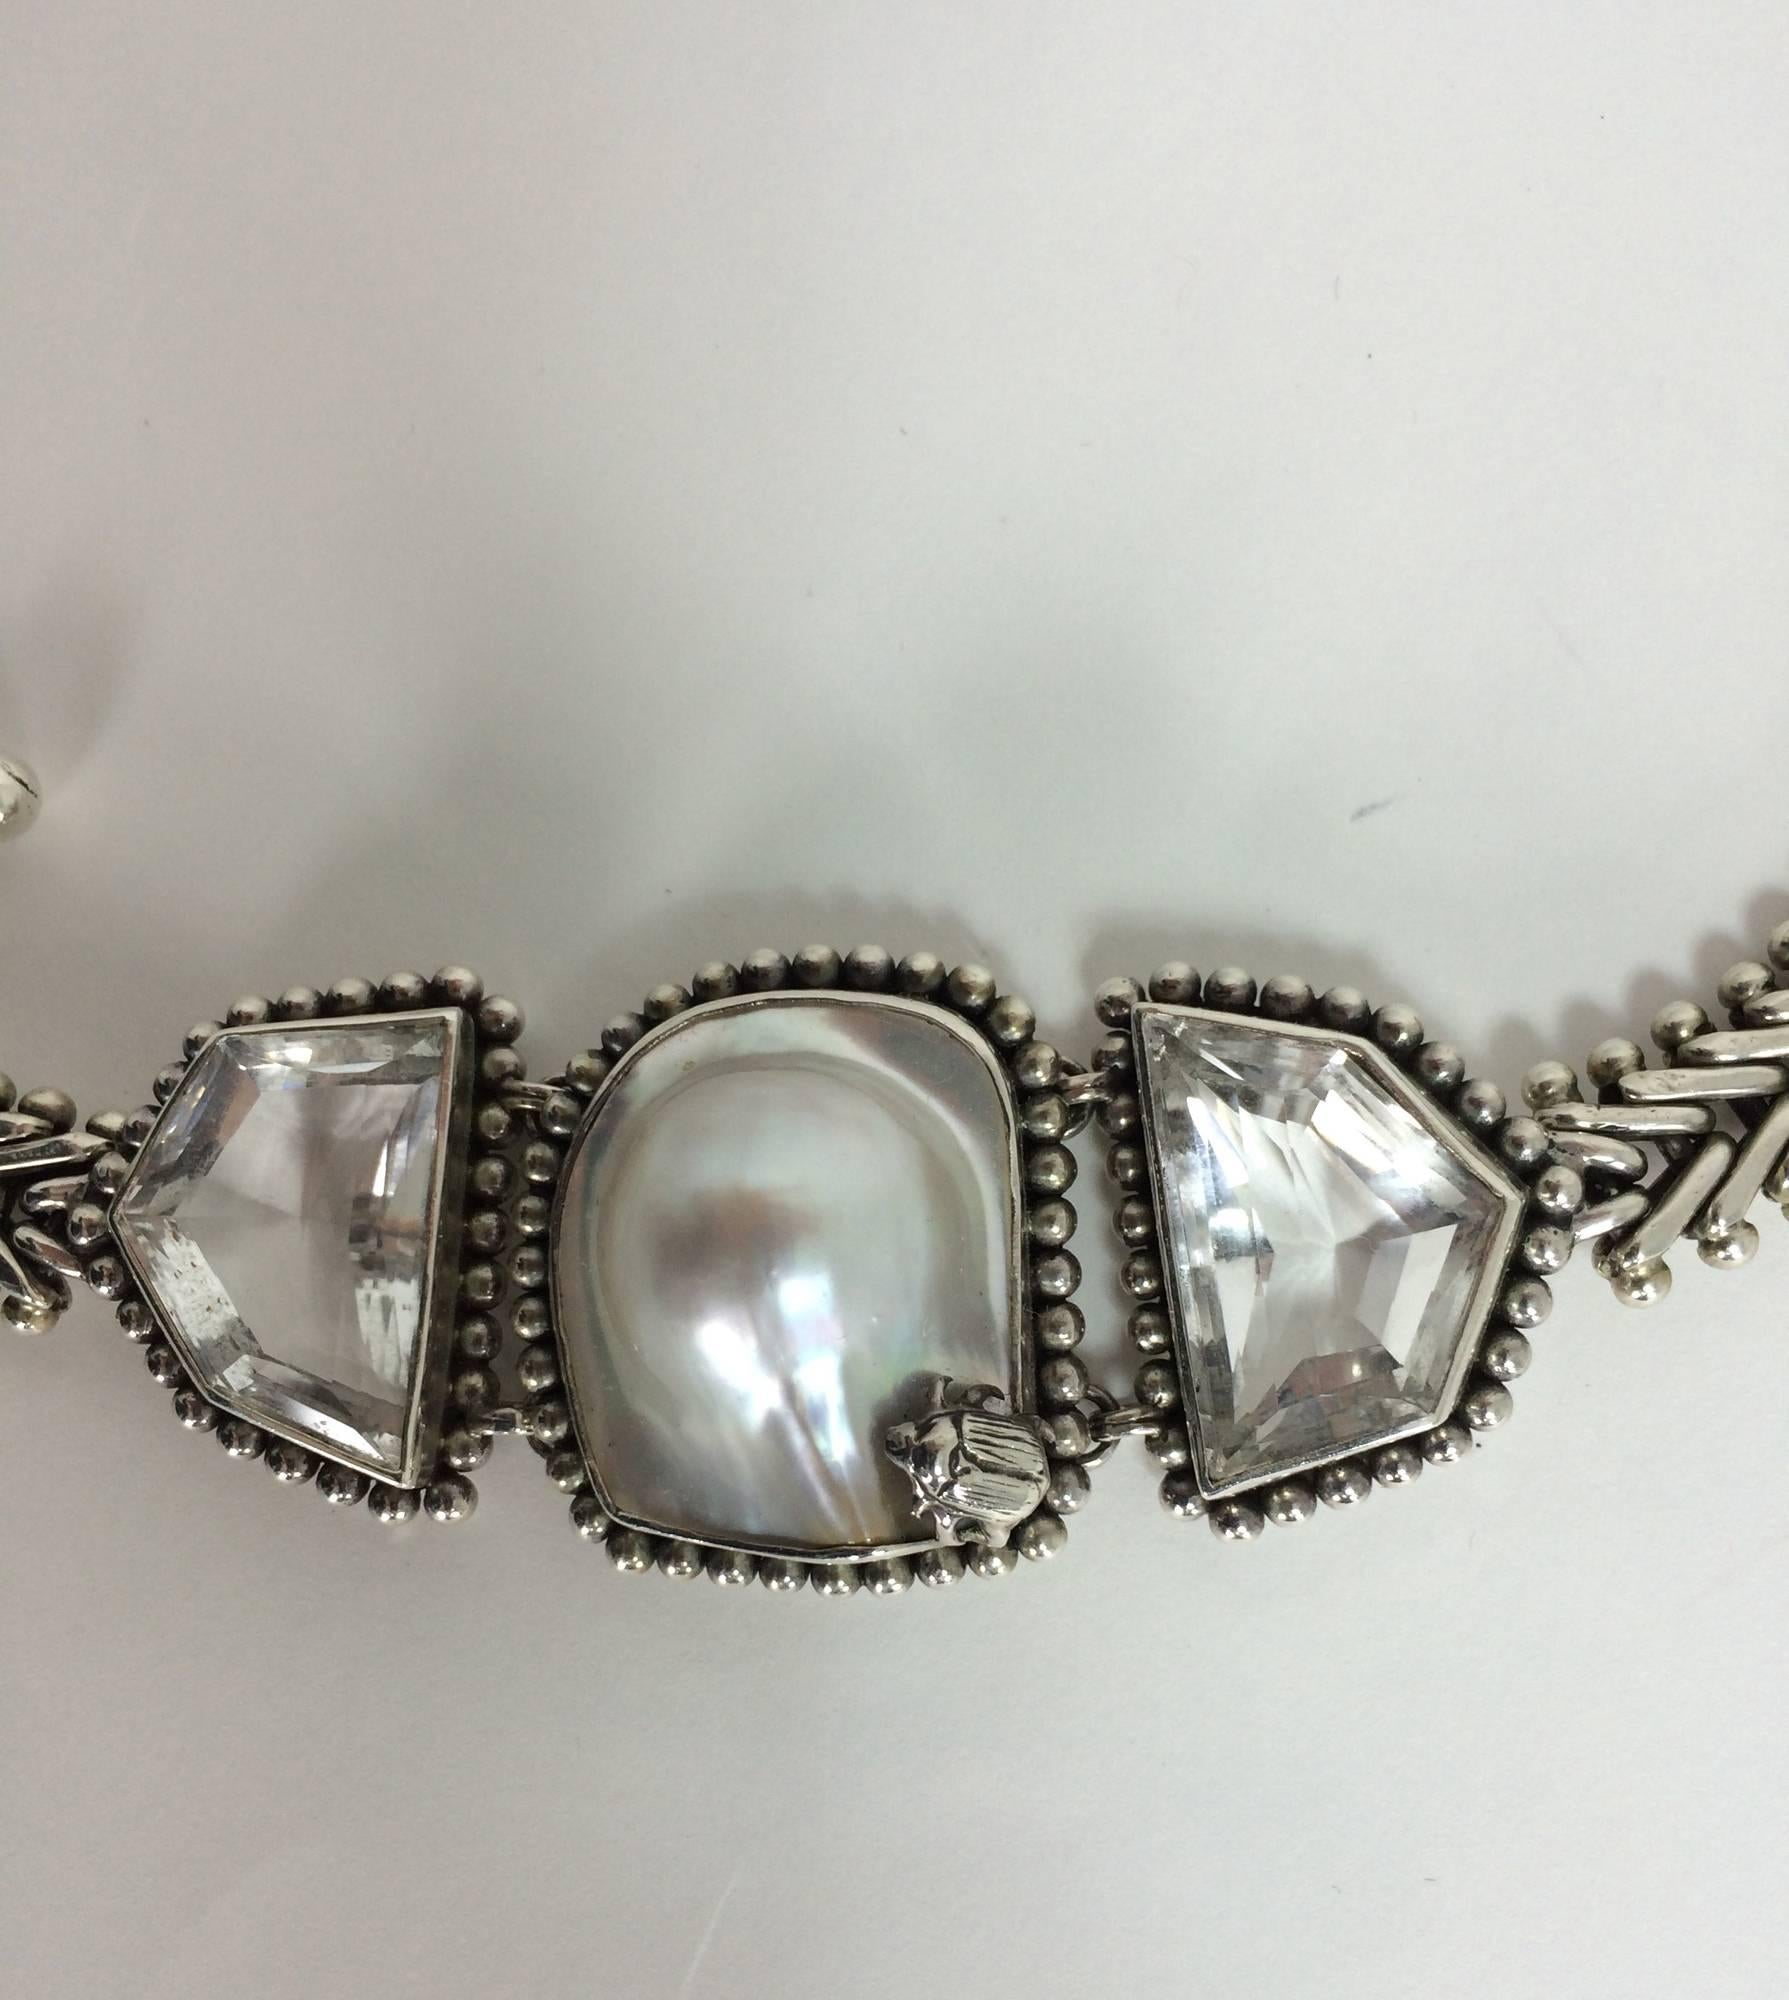 Stephen Dweck sterling silver white topaz & blister pearl bracelet marked one of a kind and dated 2000...Large and heavy sterling silver chain bracelet with a bezel set center blister pearl that has a sterling silver beetle mounted at the outside